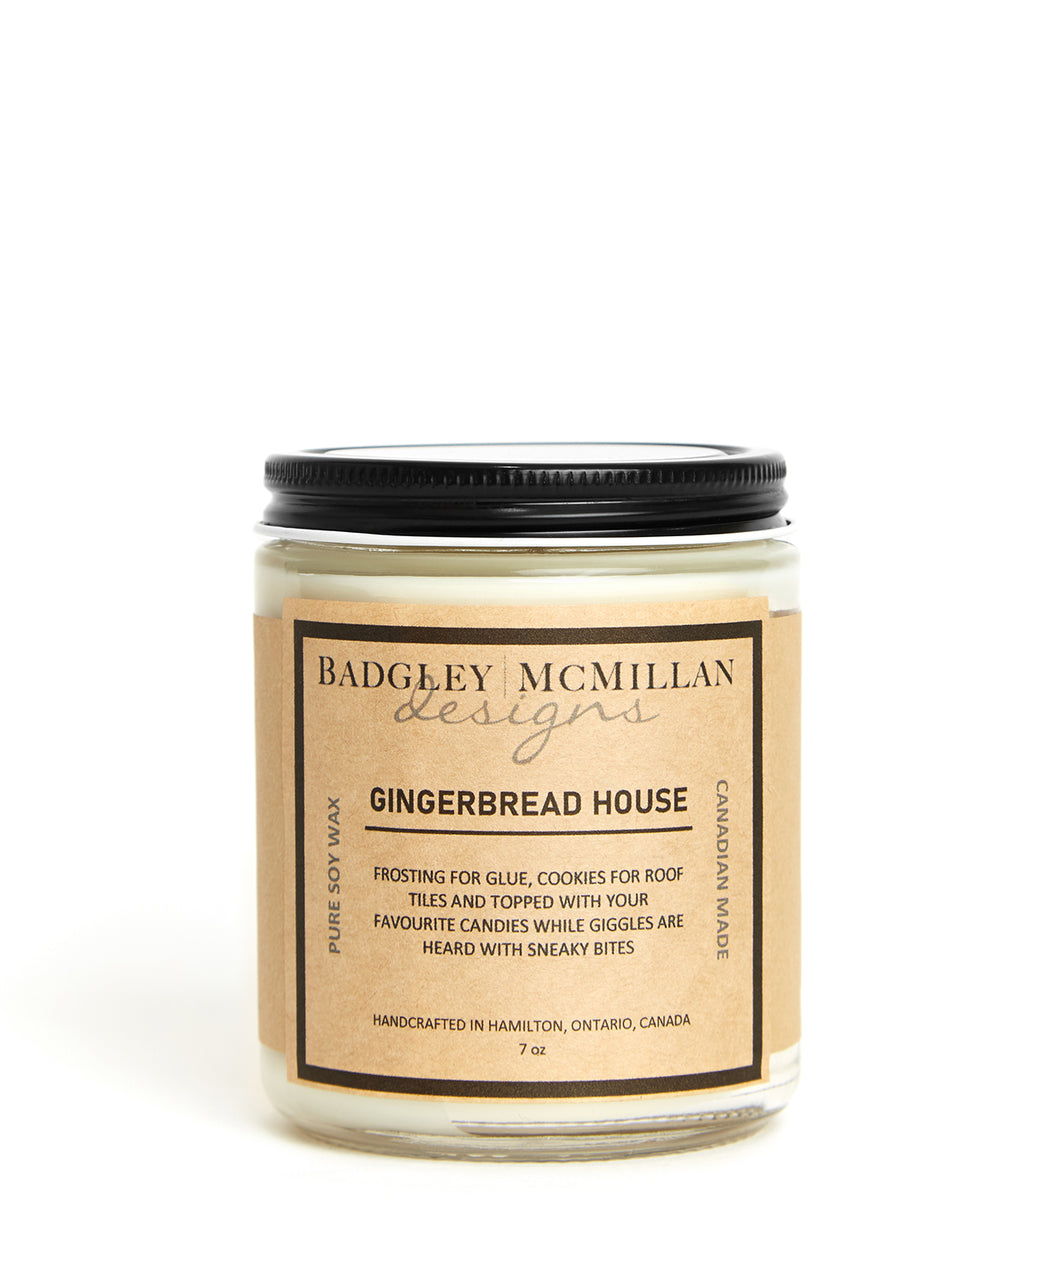 Gingerbread House 7 oz Soy Jar Candle